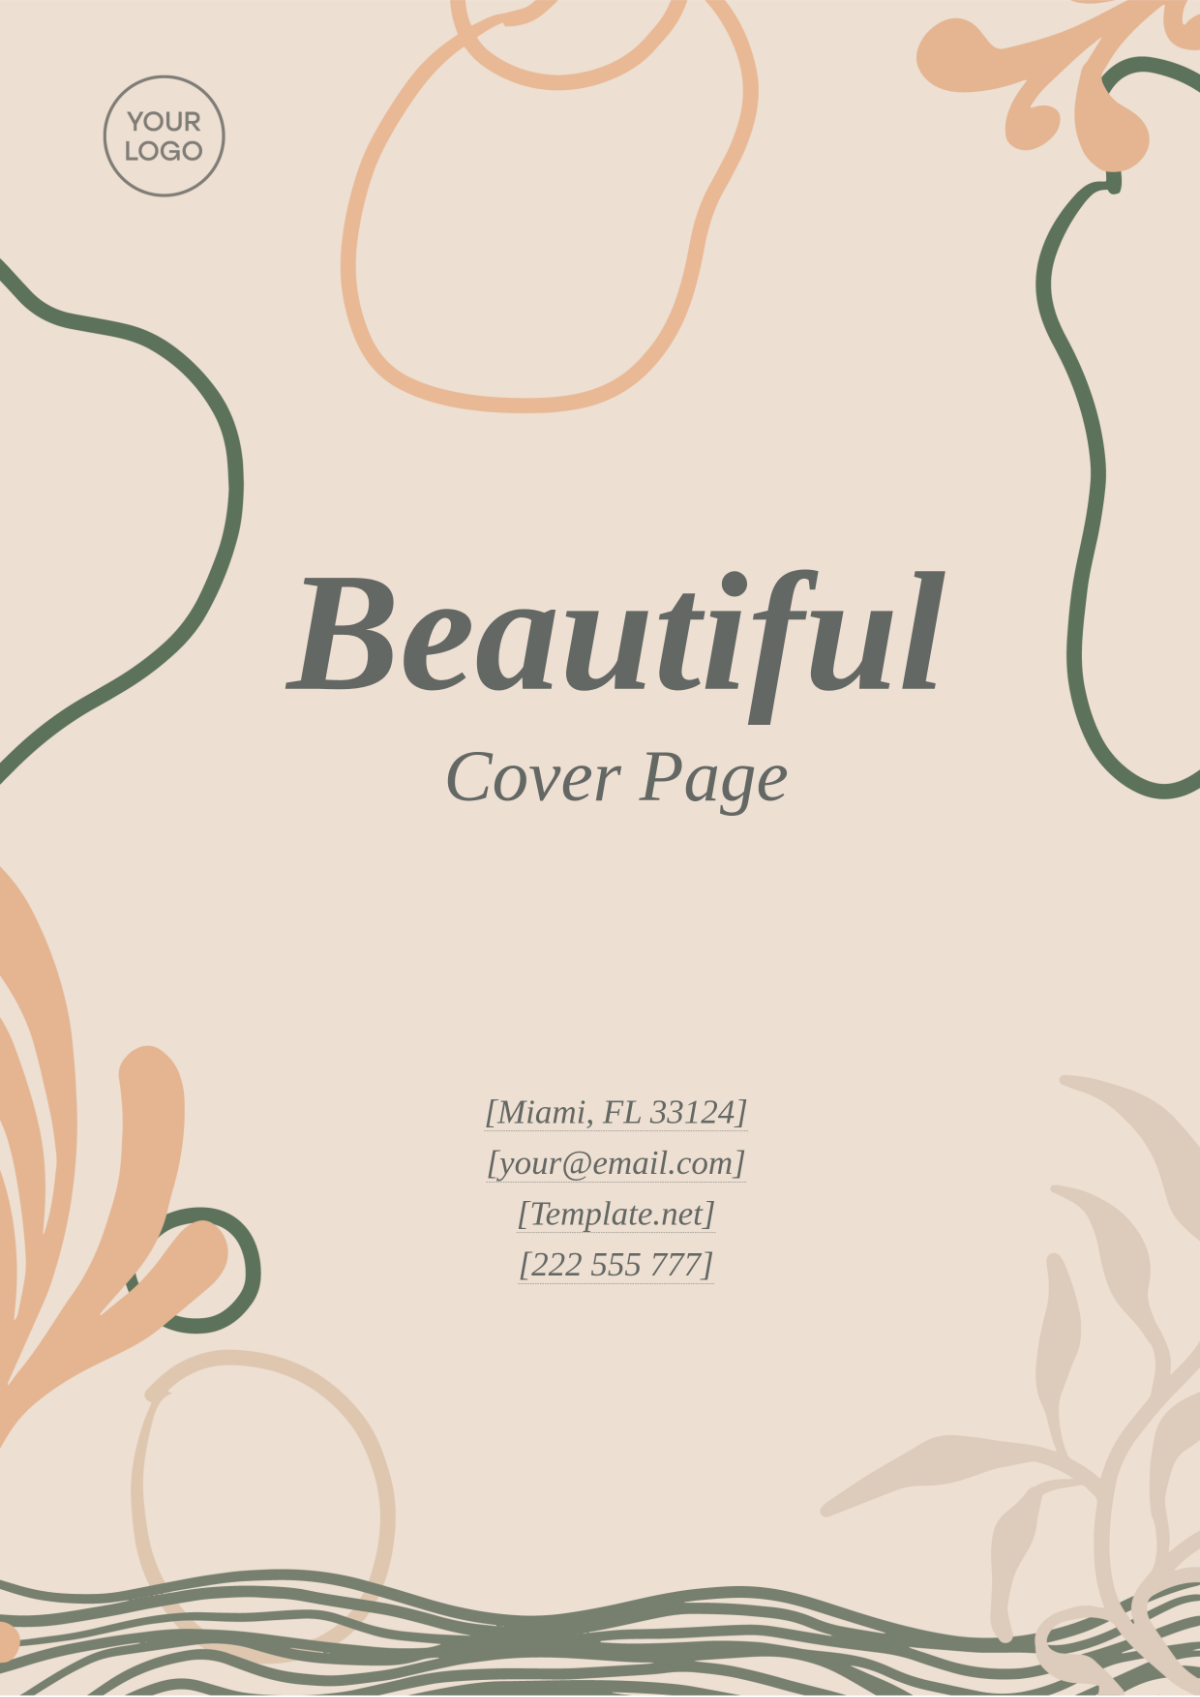 Beautiful Cover Page Image